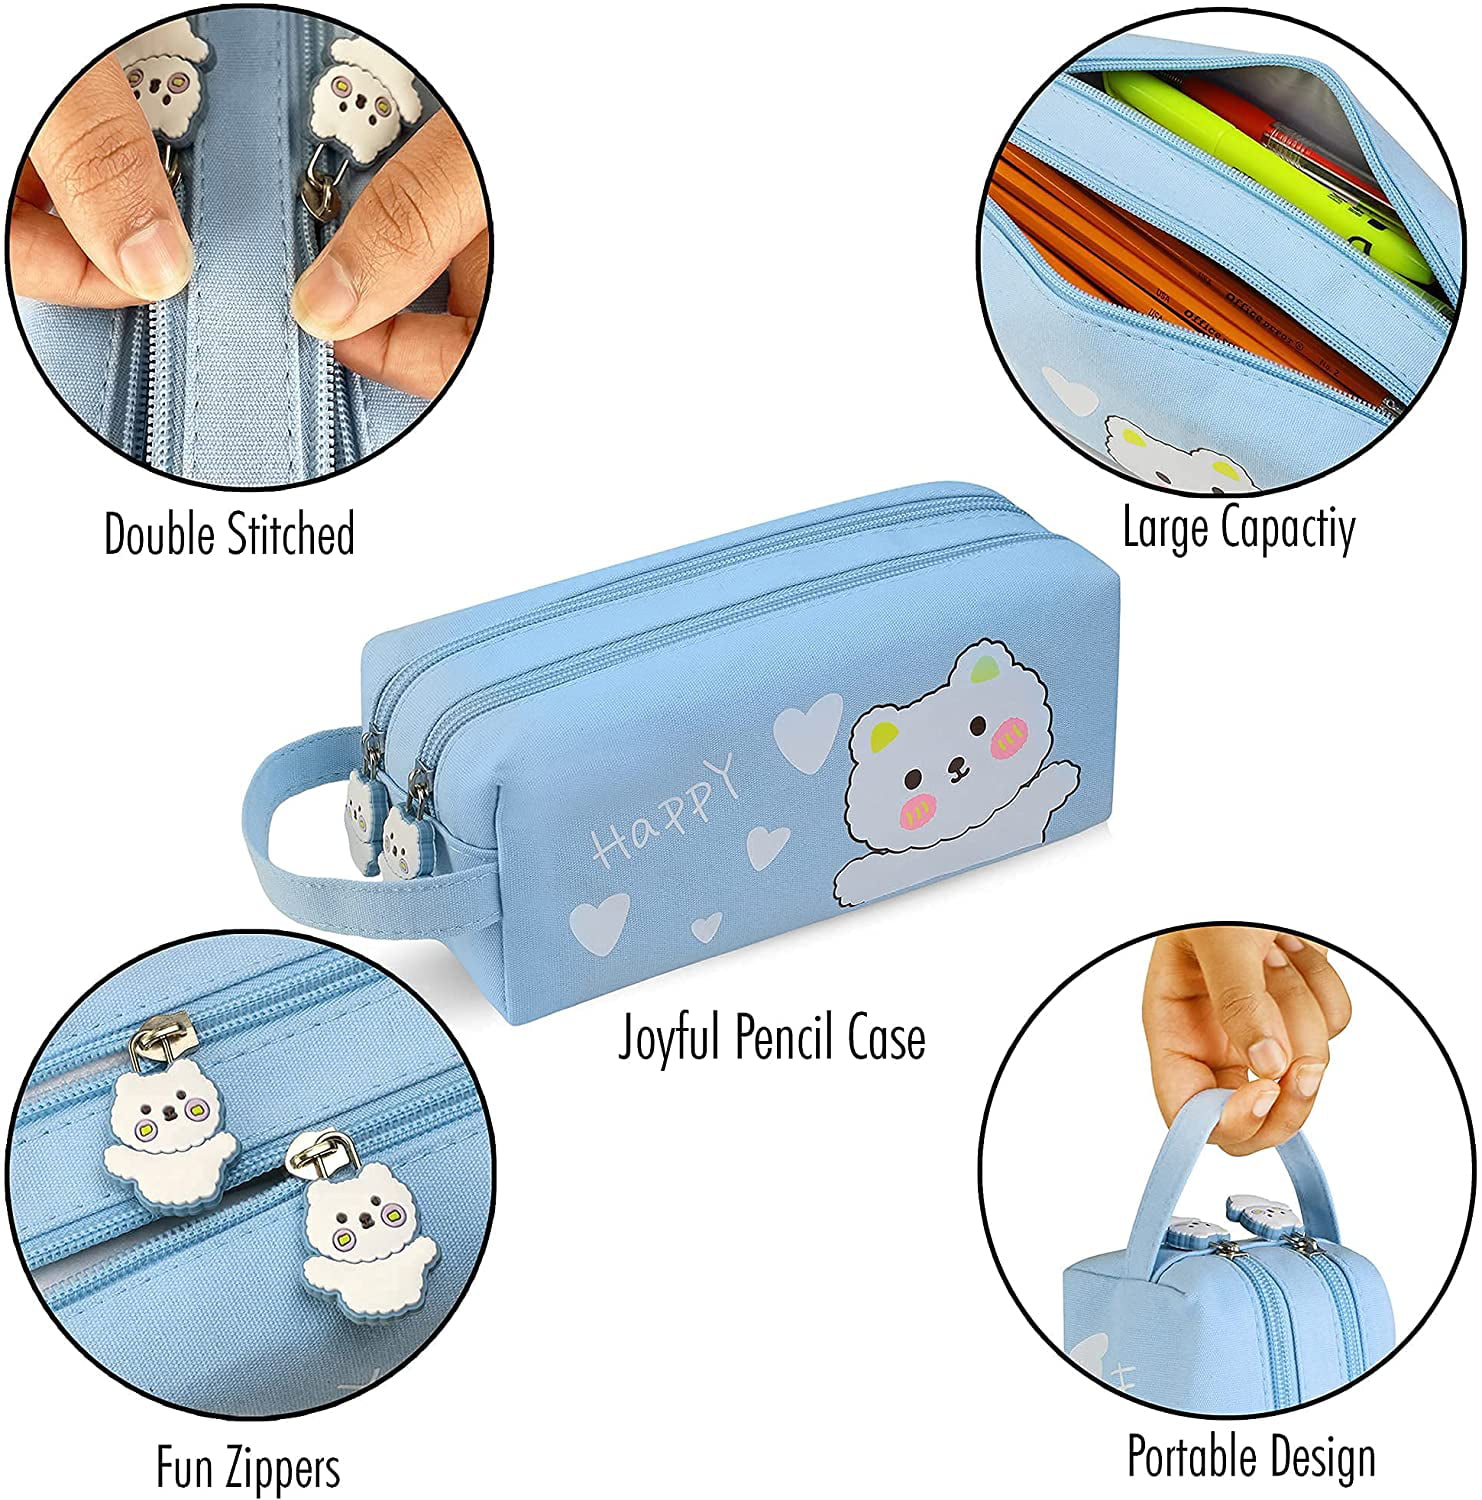  SOOCUTE Green Pencil Case Boys Cute School Supply Organizer  Cool Pen Box Holder Bag with Zipper for Kids : Everything Else